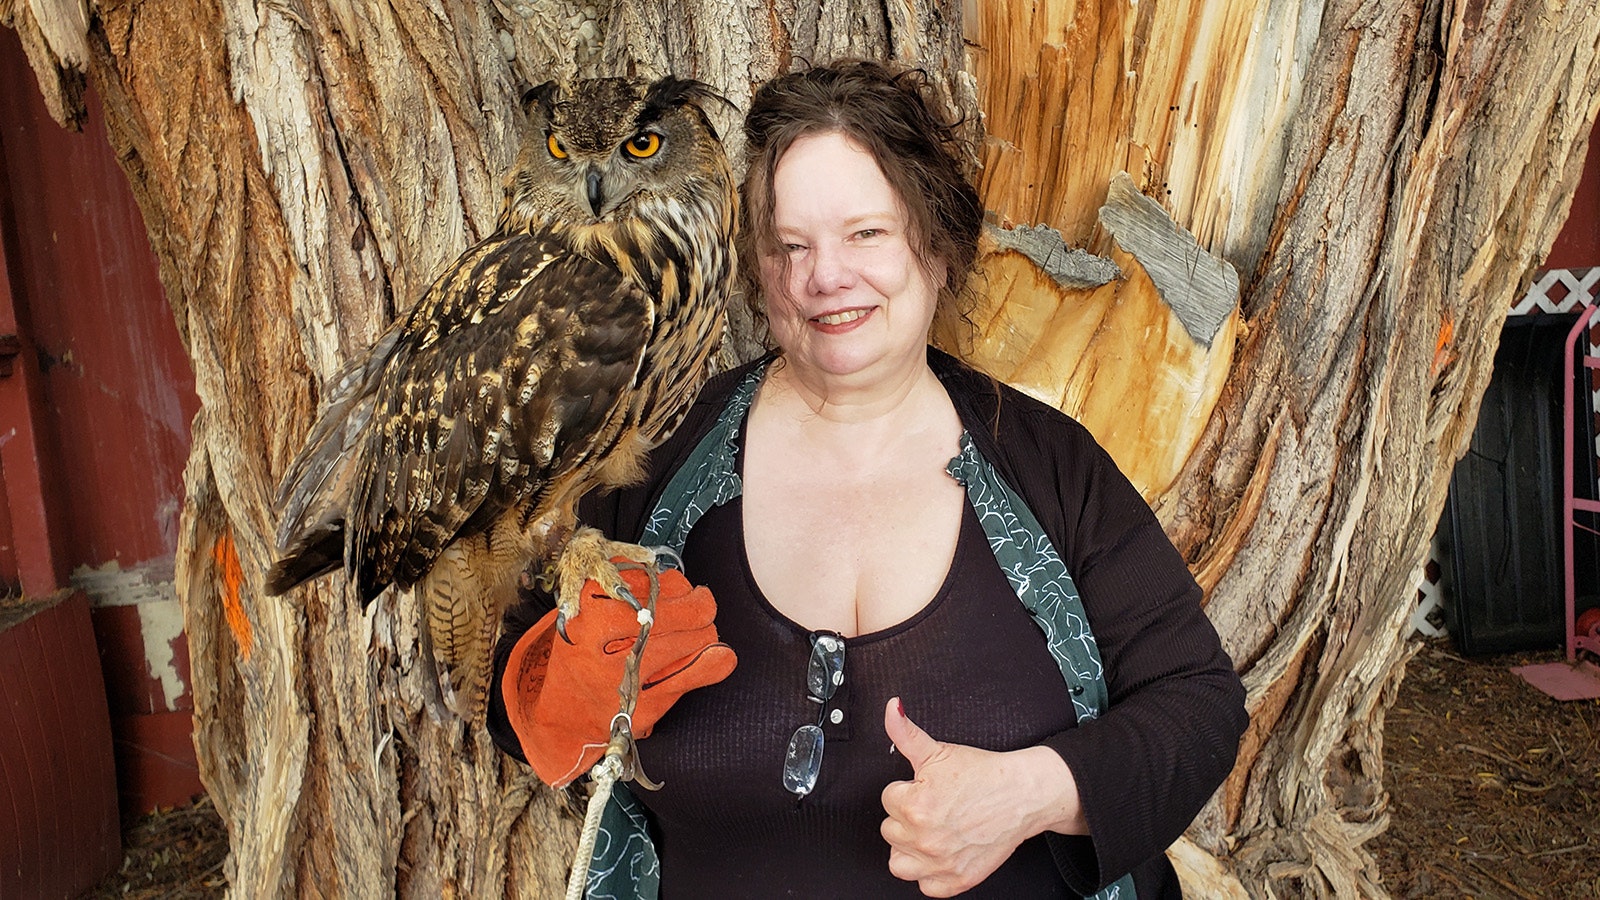 Hangin' out with Hoot, the most famous owl on the planet, at the Fort Bridger Rendezvous.